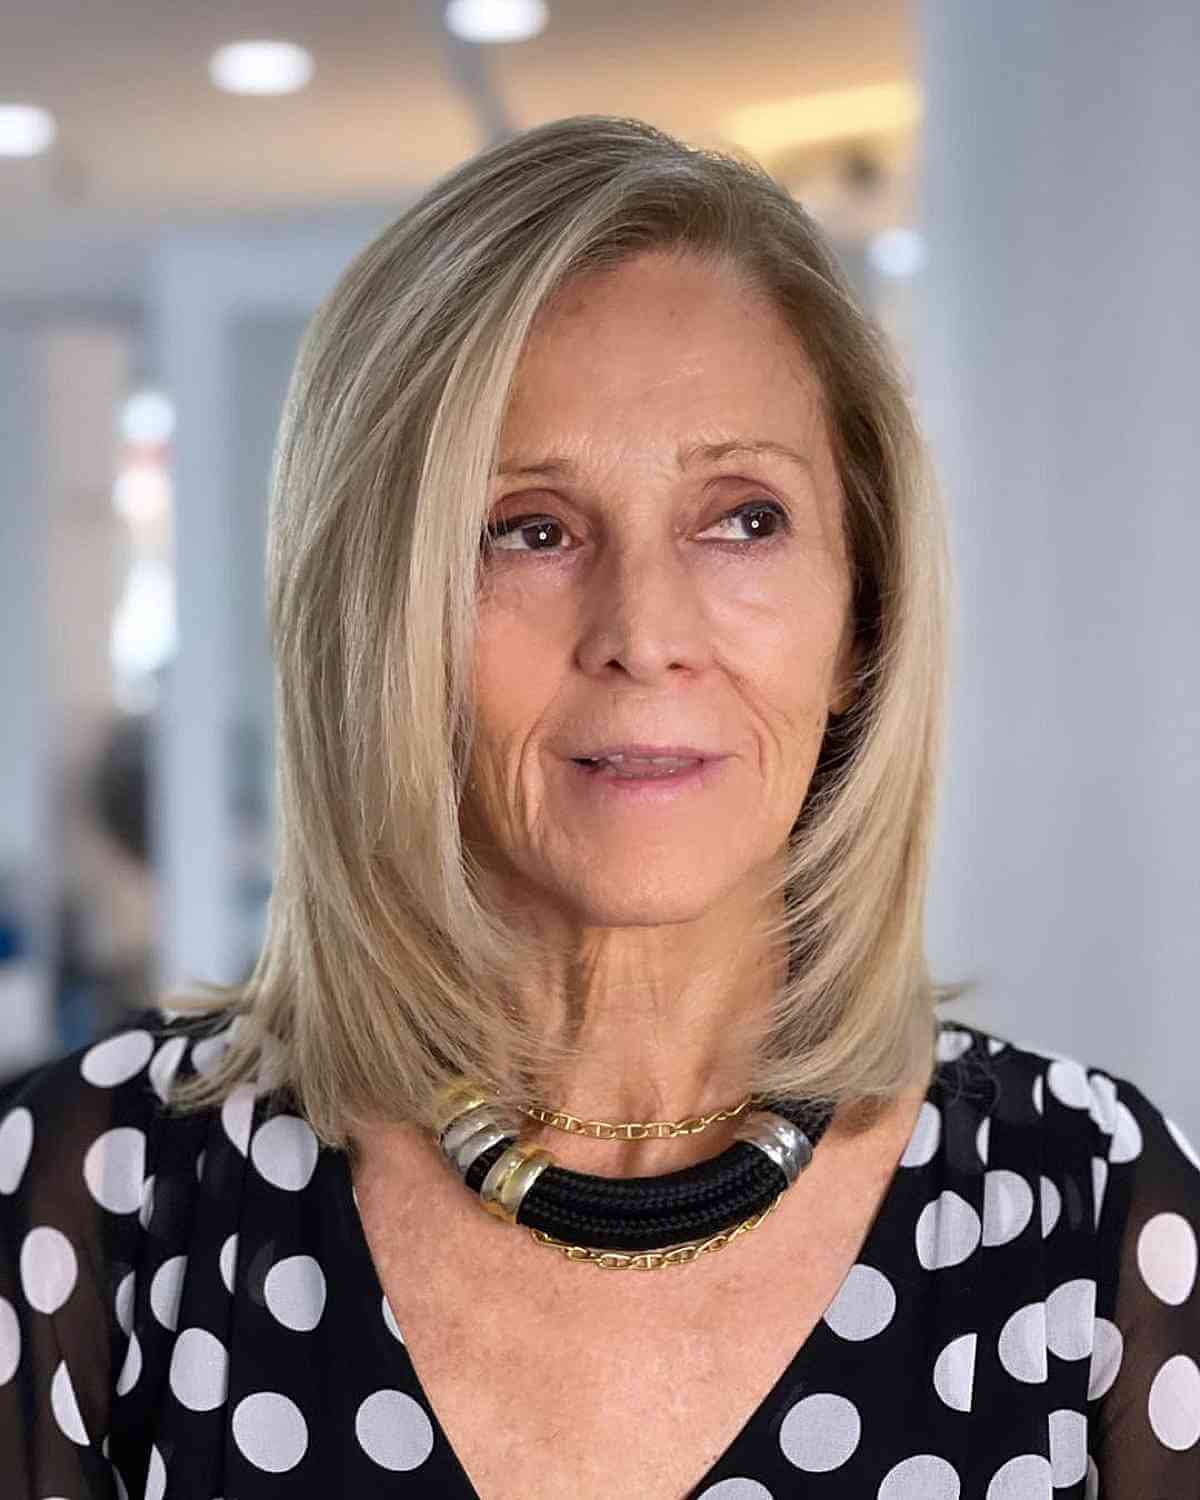 Medium-Length Side-Parted Hair for Ladies Over Seventy